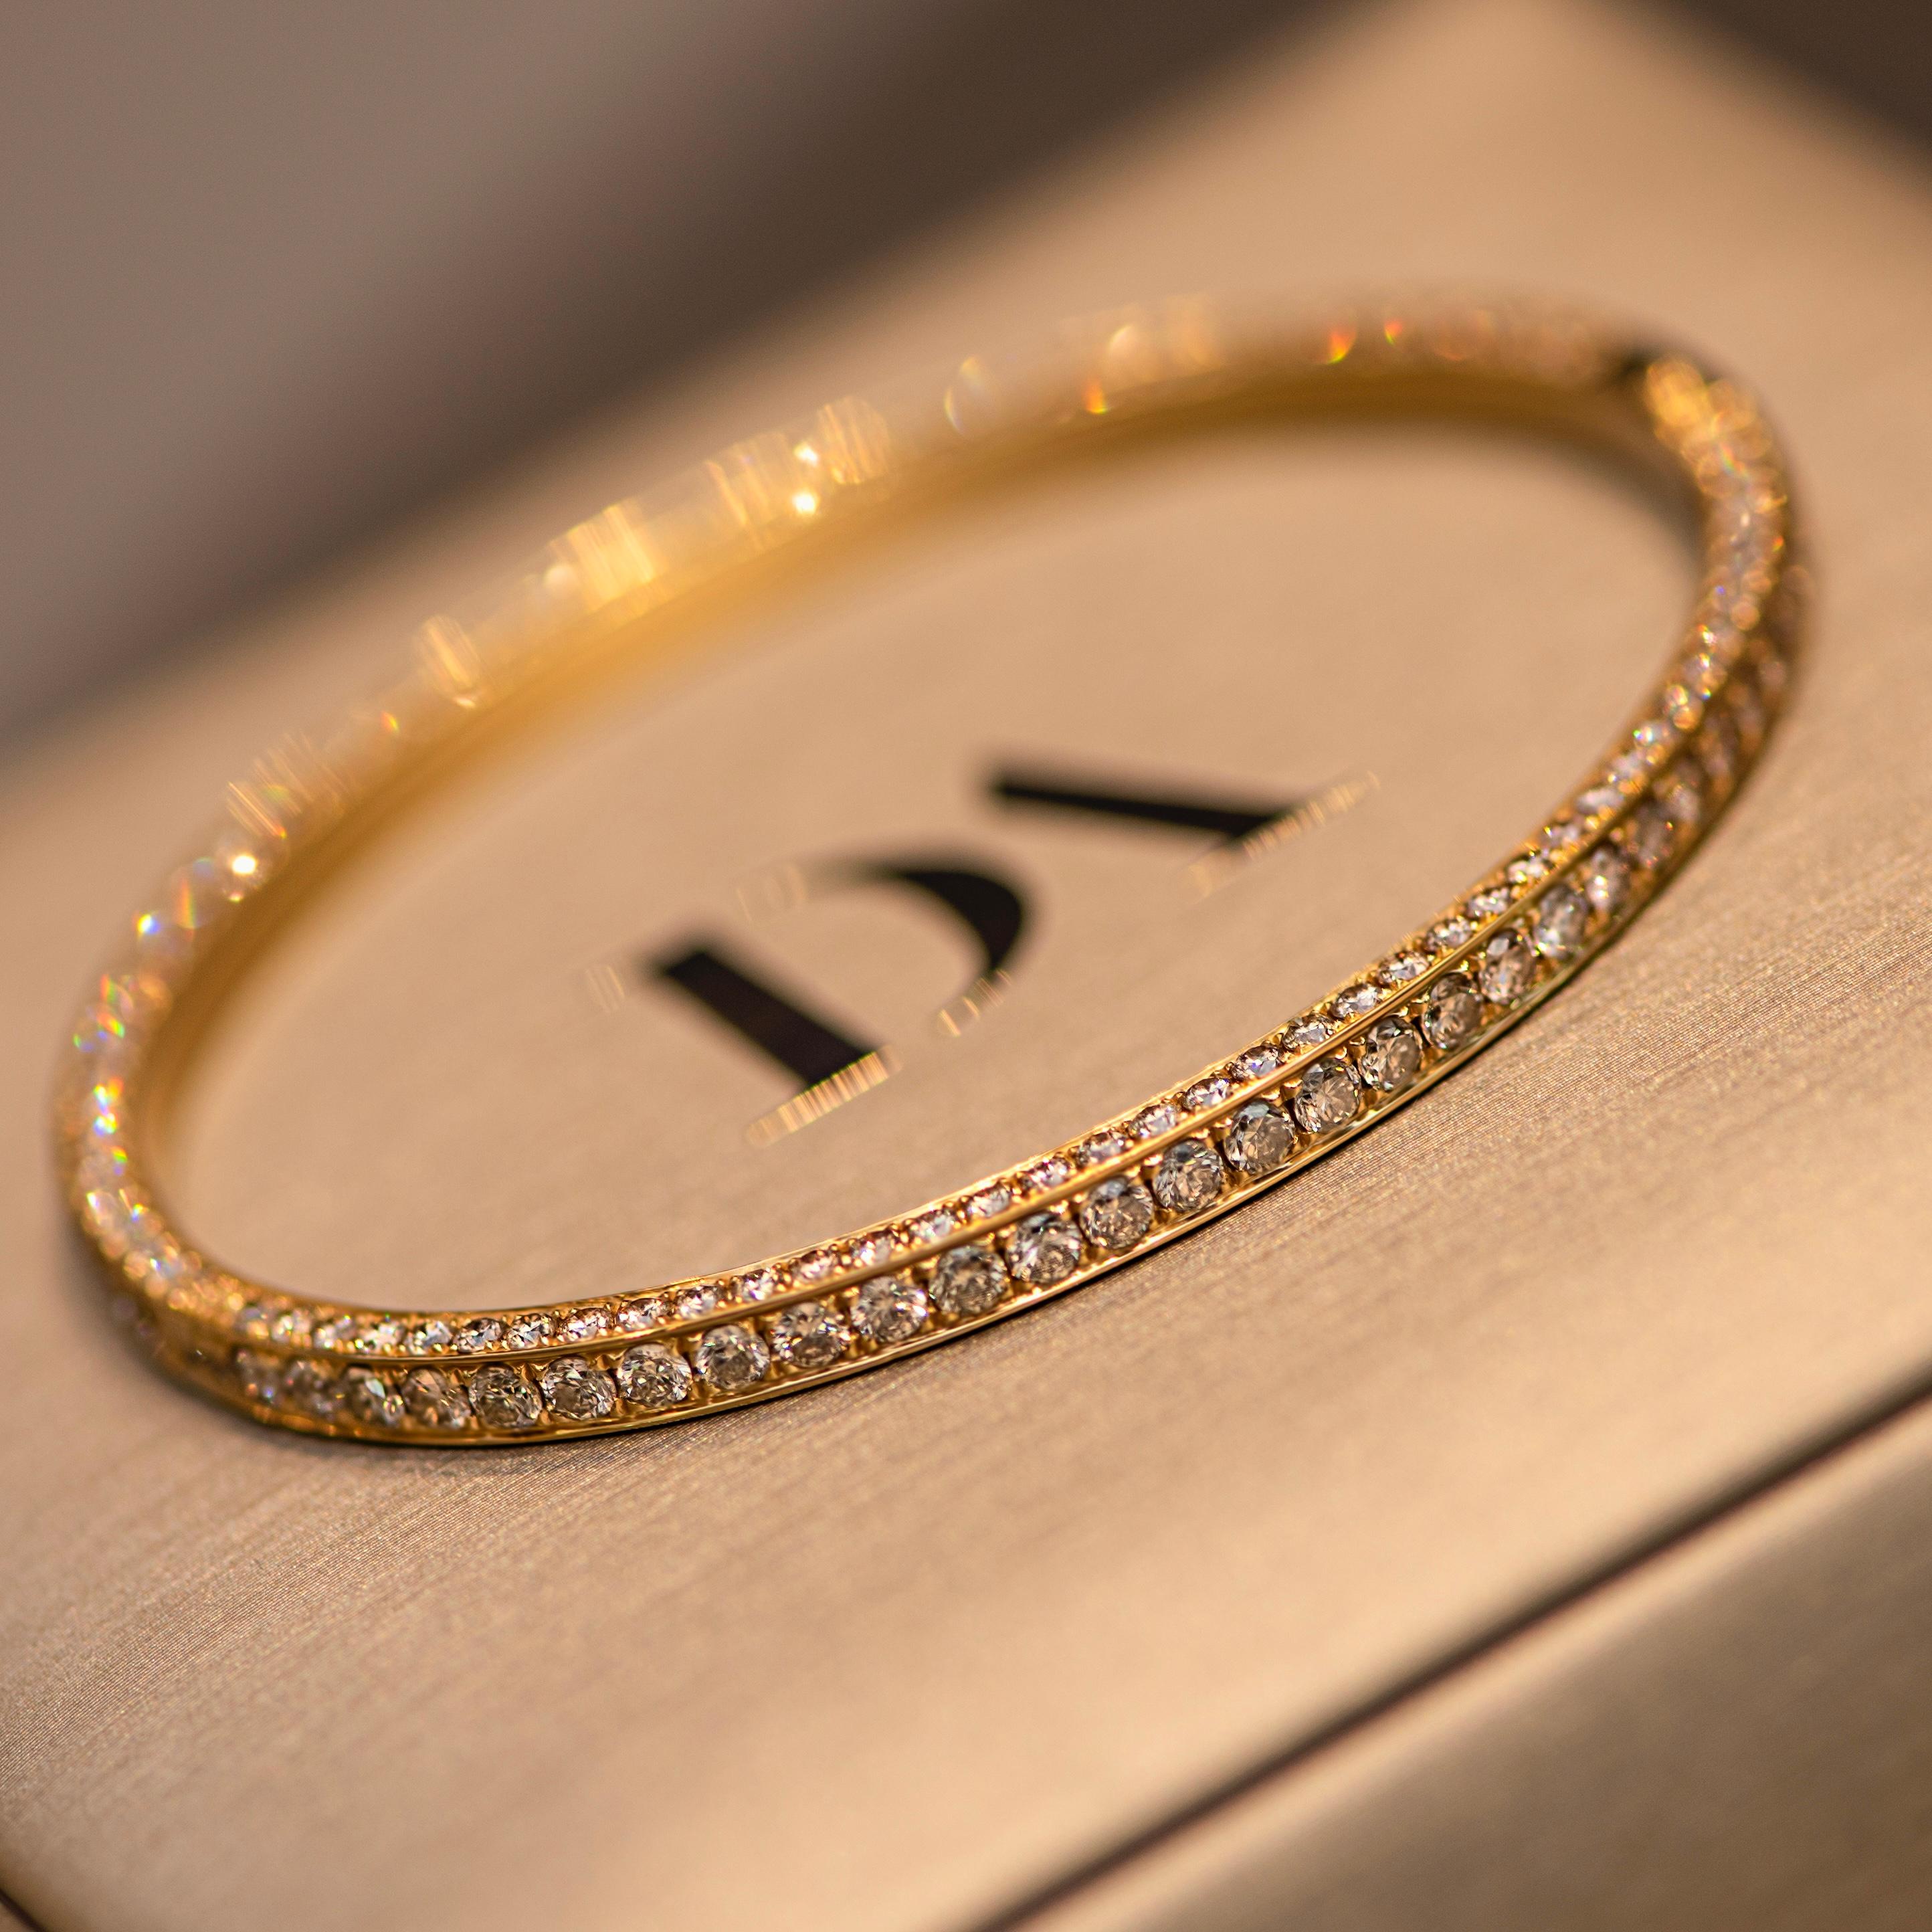 Do you like bracelets? If yes, we have one very nice and airy option for you
Delicate elegant and unusual bangle with champagne diamonds look very elegant and airy on the hand and attracts the attention with it amazing sparkle
This bracelet is on